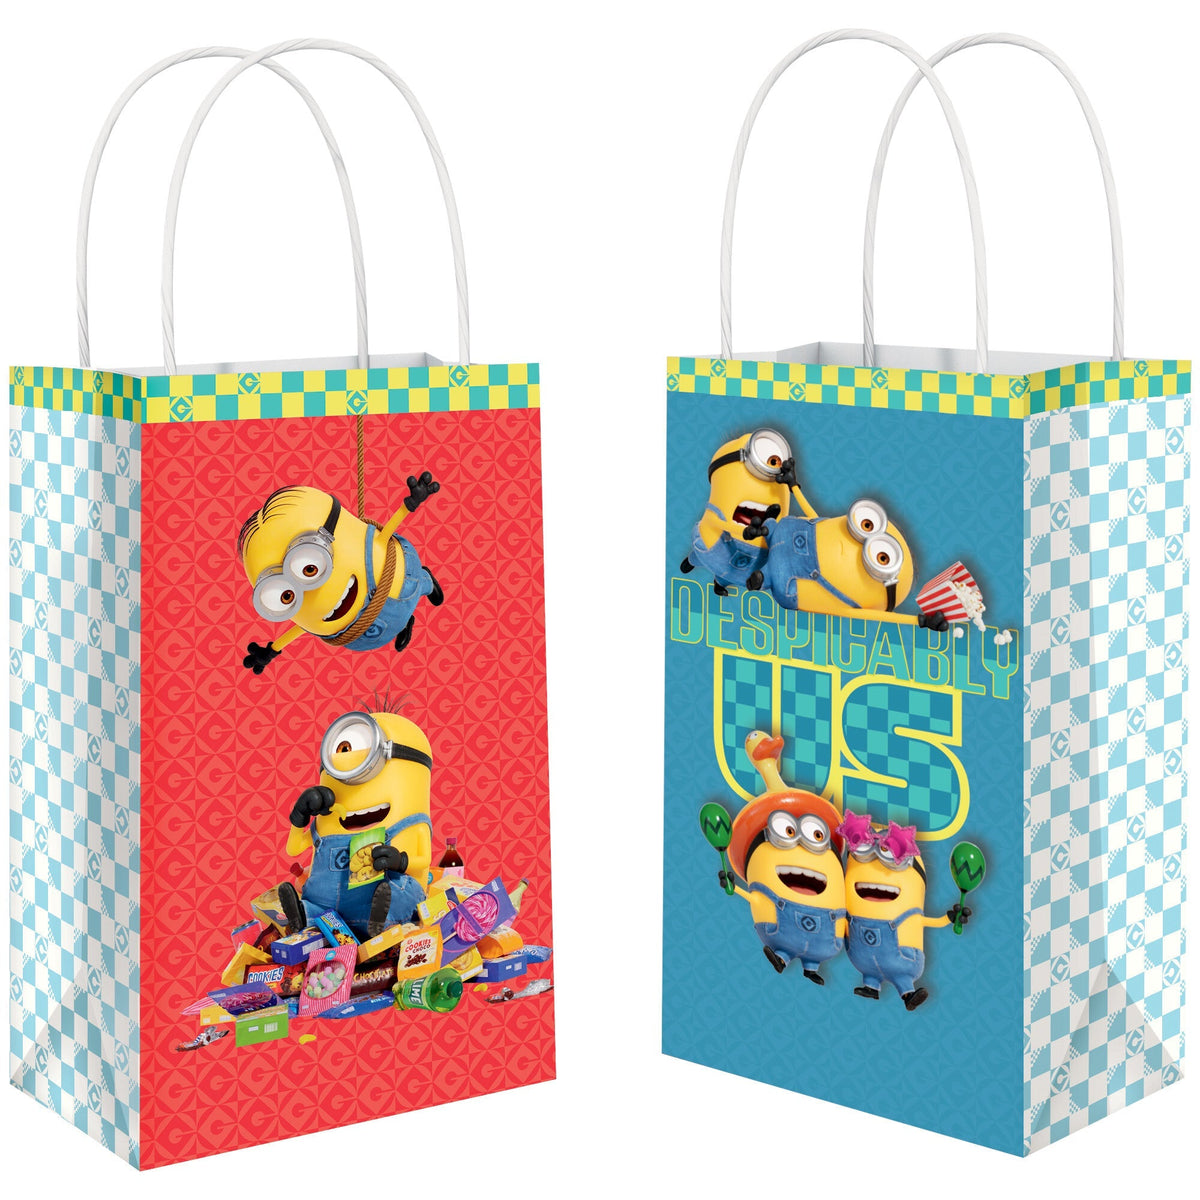 AMSCAN CA Kids Birthday Despicable Me 4 Printed Kraft Surprise Paper Bags, 8 1/4 x 5 1/4 x 3 inches, 8 Count 192937433478